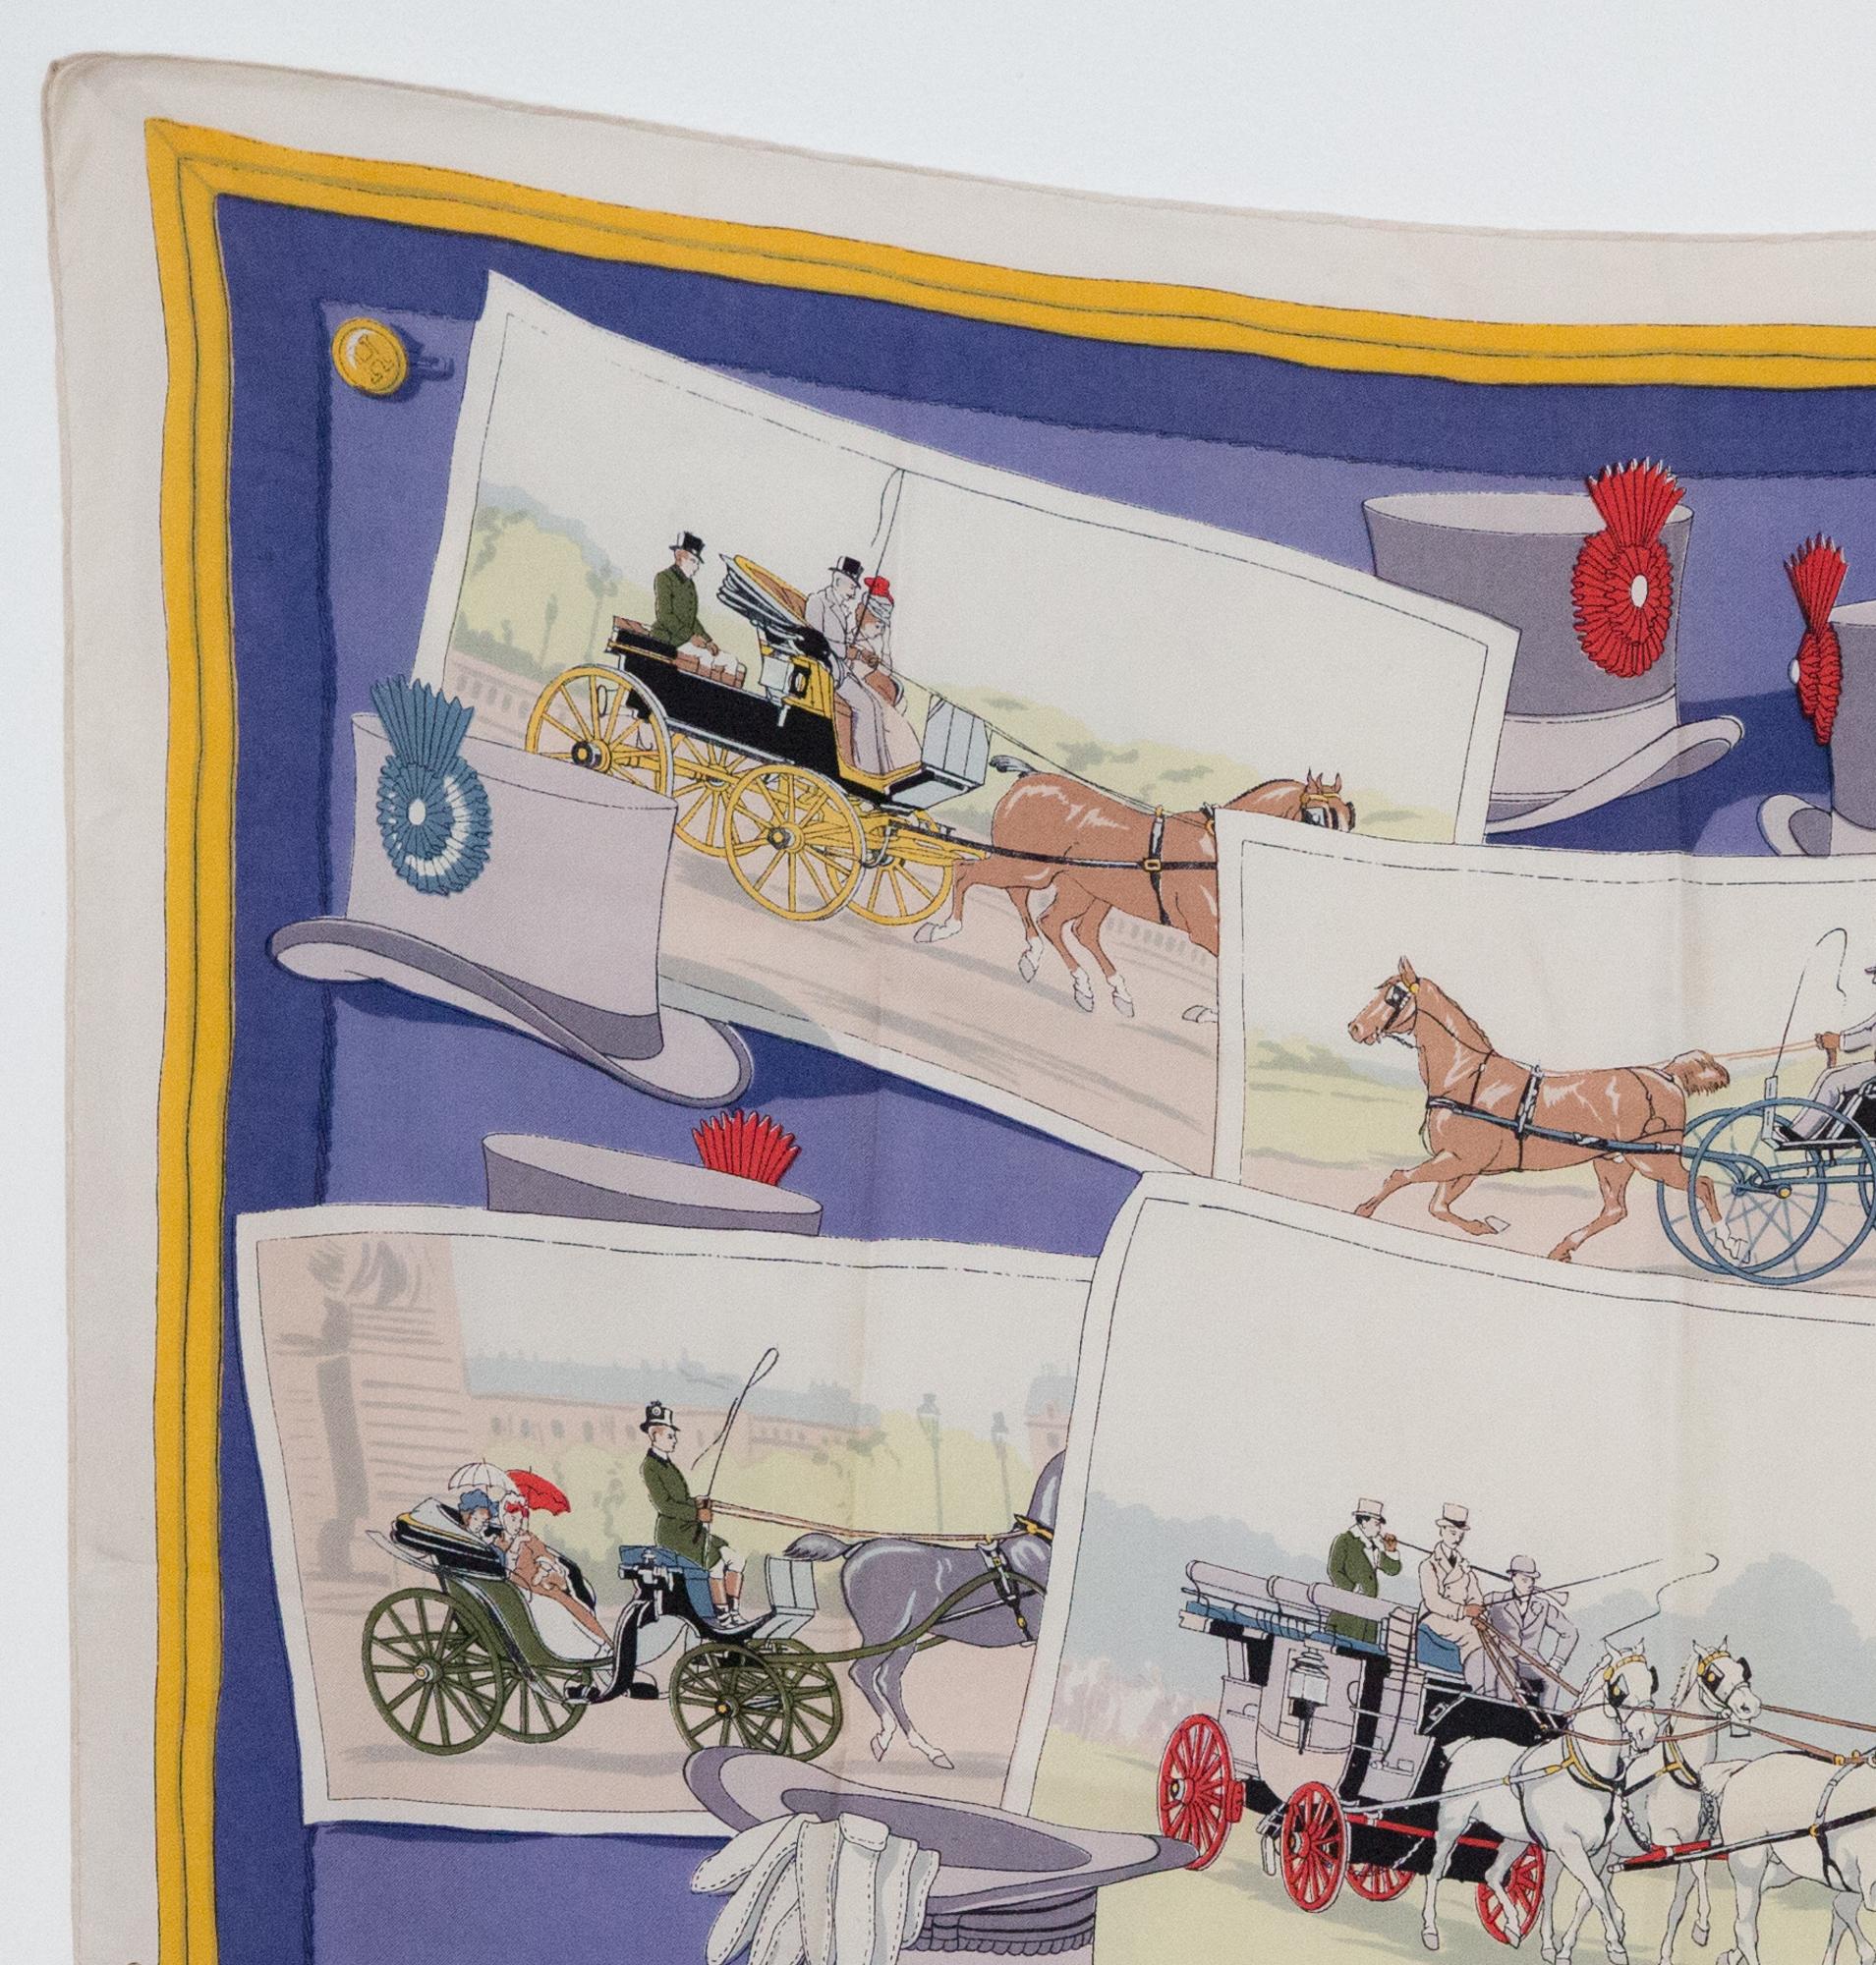 Hermes silk scarf Attelages or Mail Coaches by Hugo Grygkar featuring a yellow border, a mail coaches scene.
The designer Hugo Grygkar and the scarf name are not mentioned on. It is a very rare scarf.
First edition 1953 
In good vintage condition.